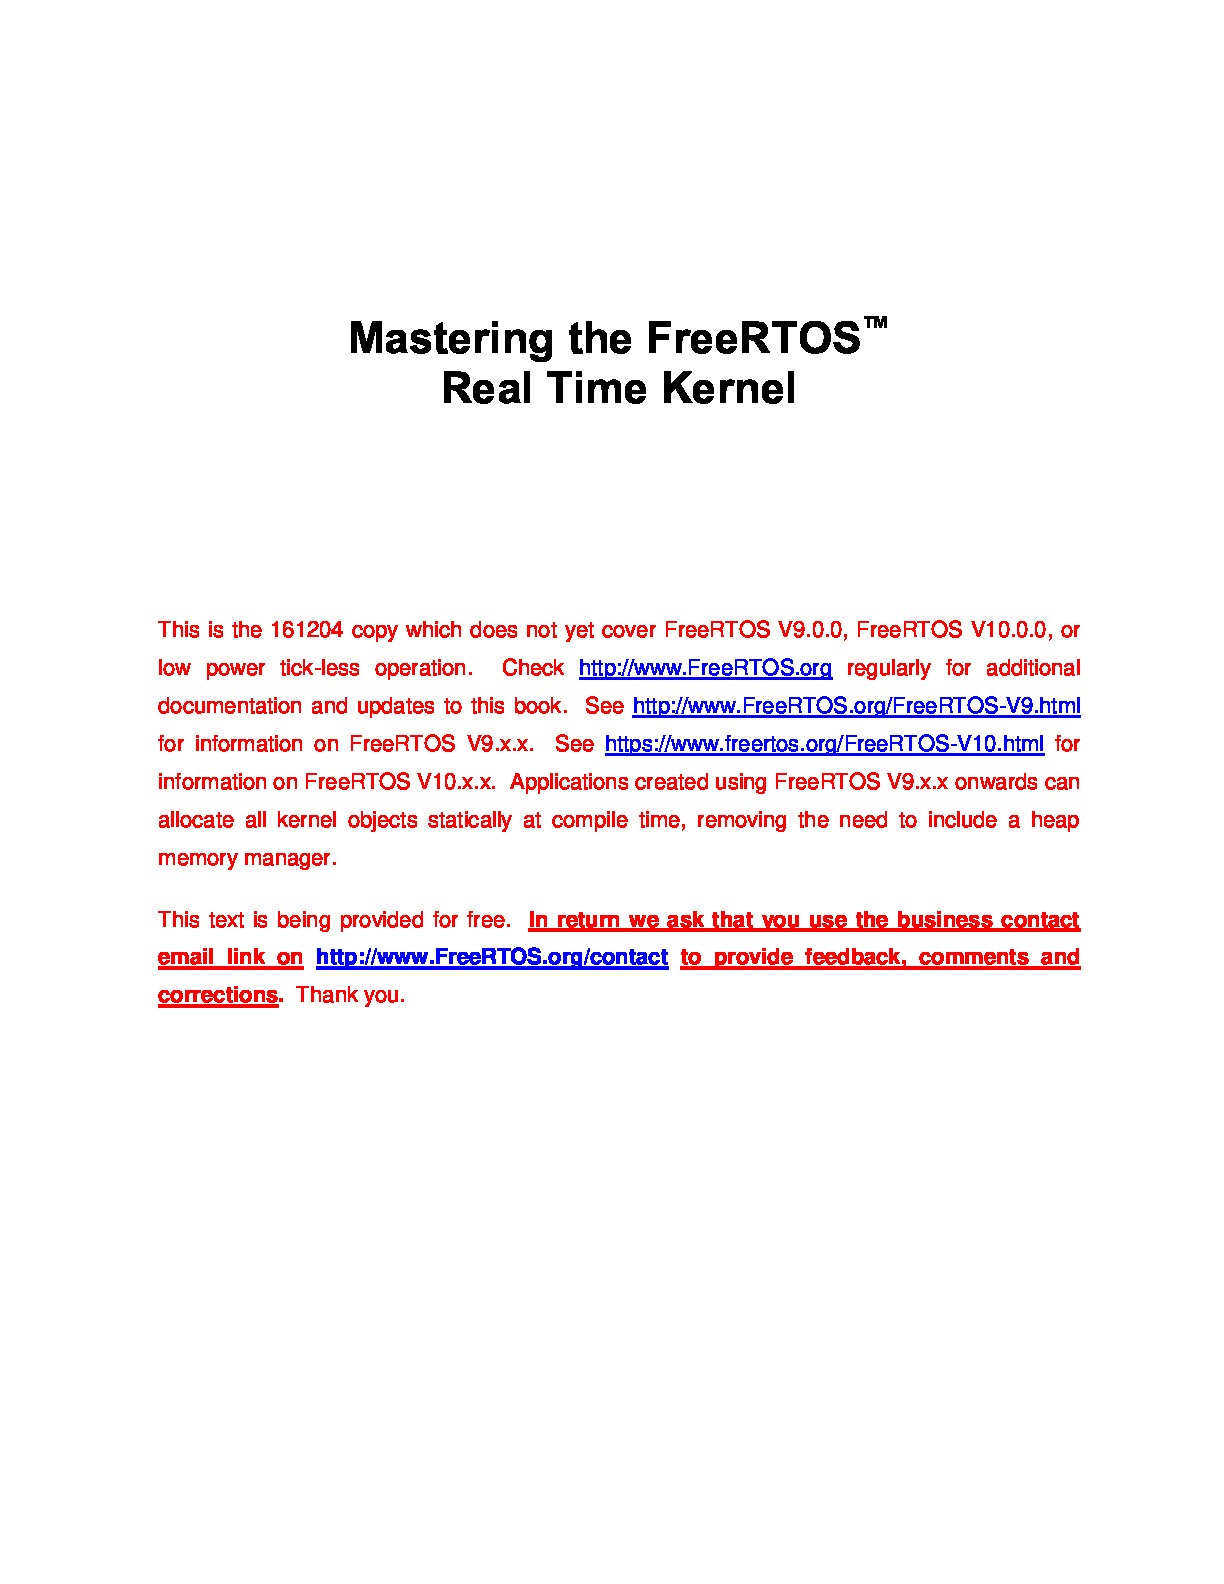 Mastering_the_FreeRTOS_Real_Time_Kernel-A_Hands-On_Tutorial_Guide